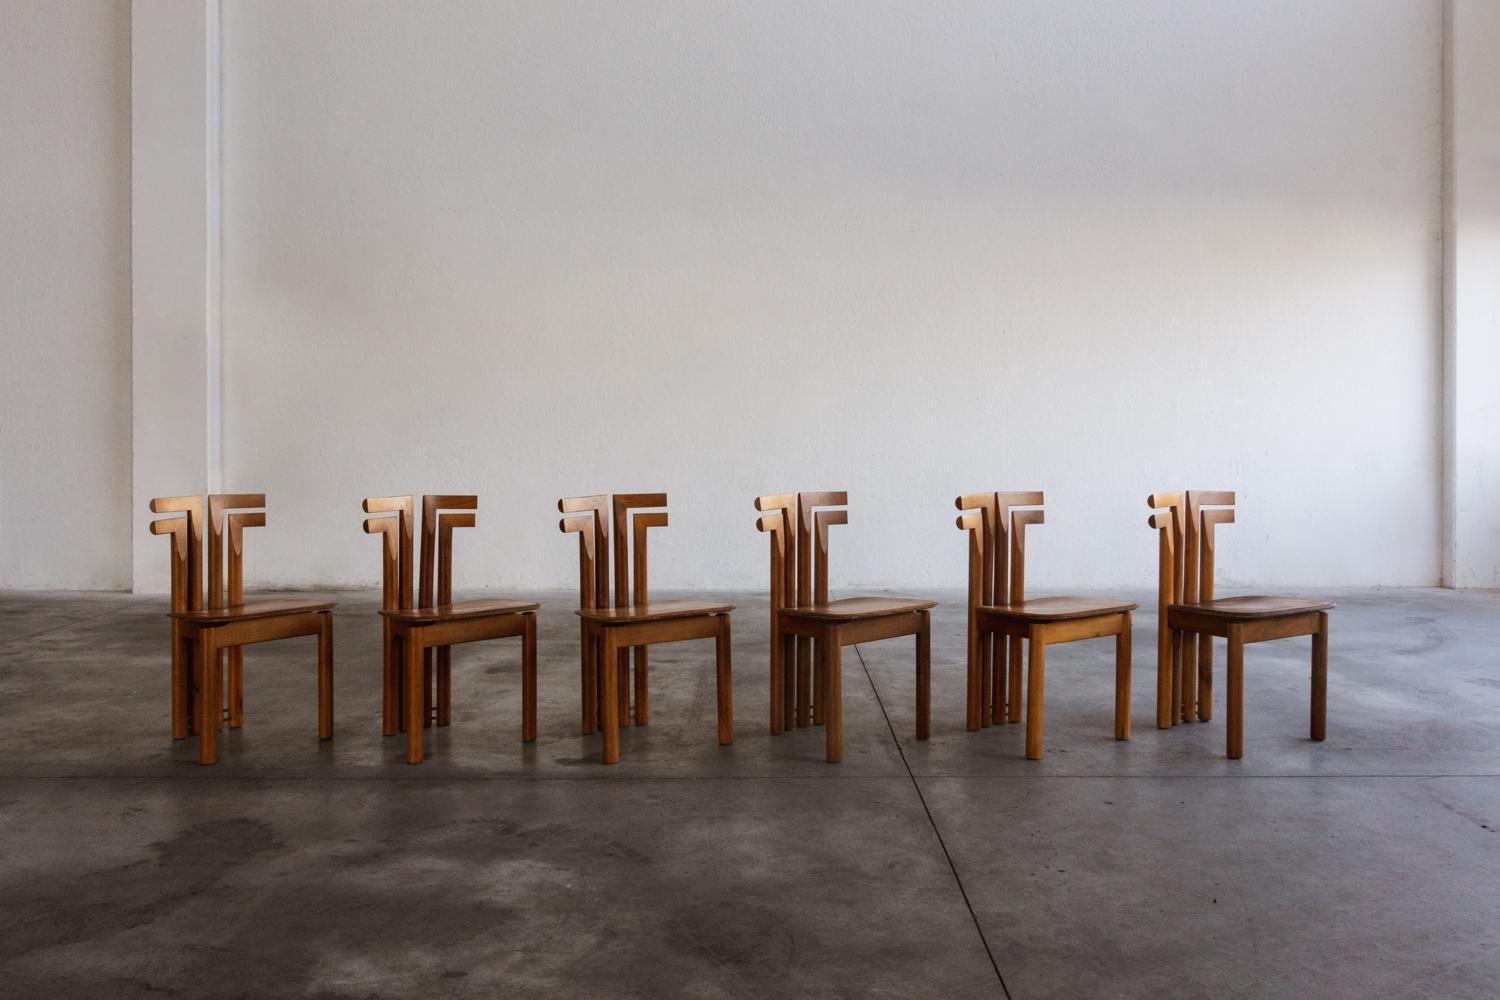 Mario Marenco “Sapporo” dining chairs for Mobil Girgi, beech and leather, Italy, 1970, set of six.

A rare variant of the iconic Marenco’s “Sapporo” chair, this version shows a strong personality and this is immediately recognizable, with some